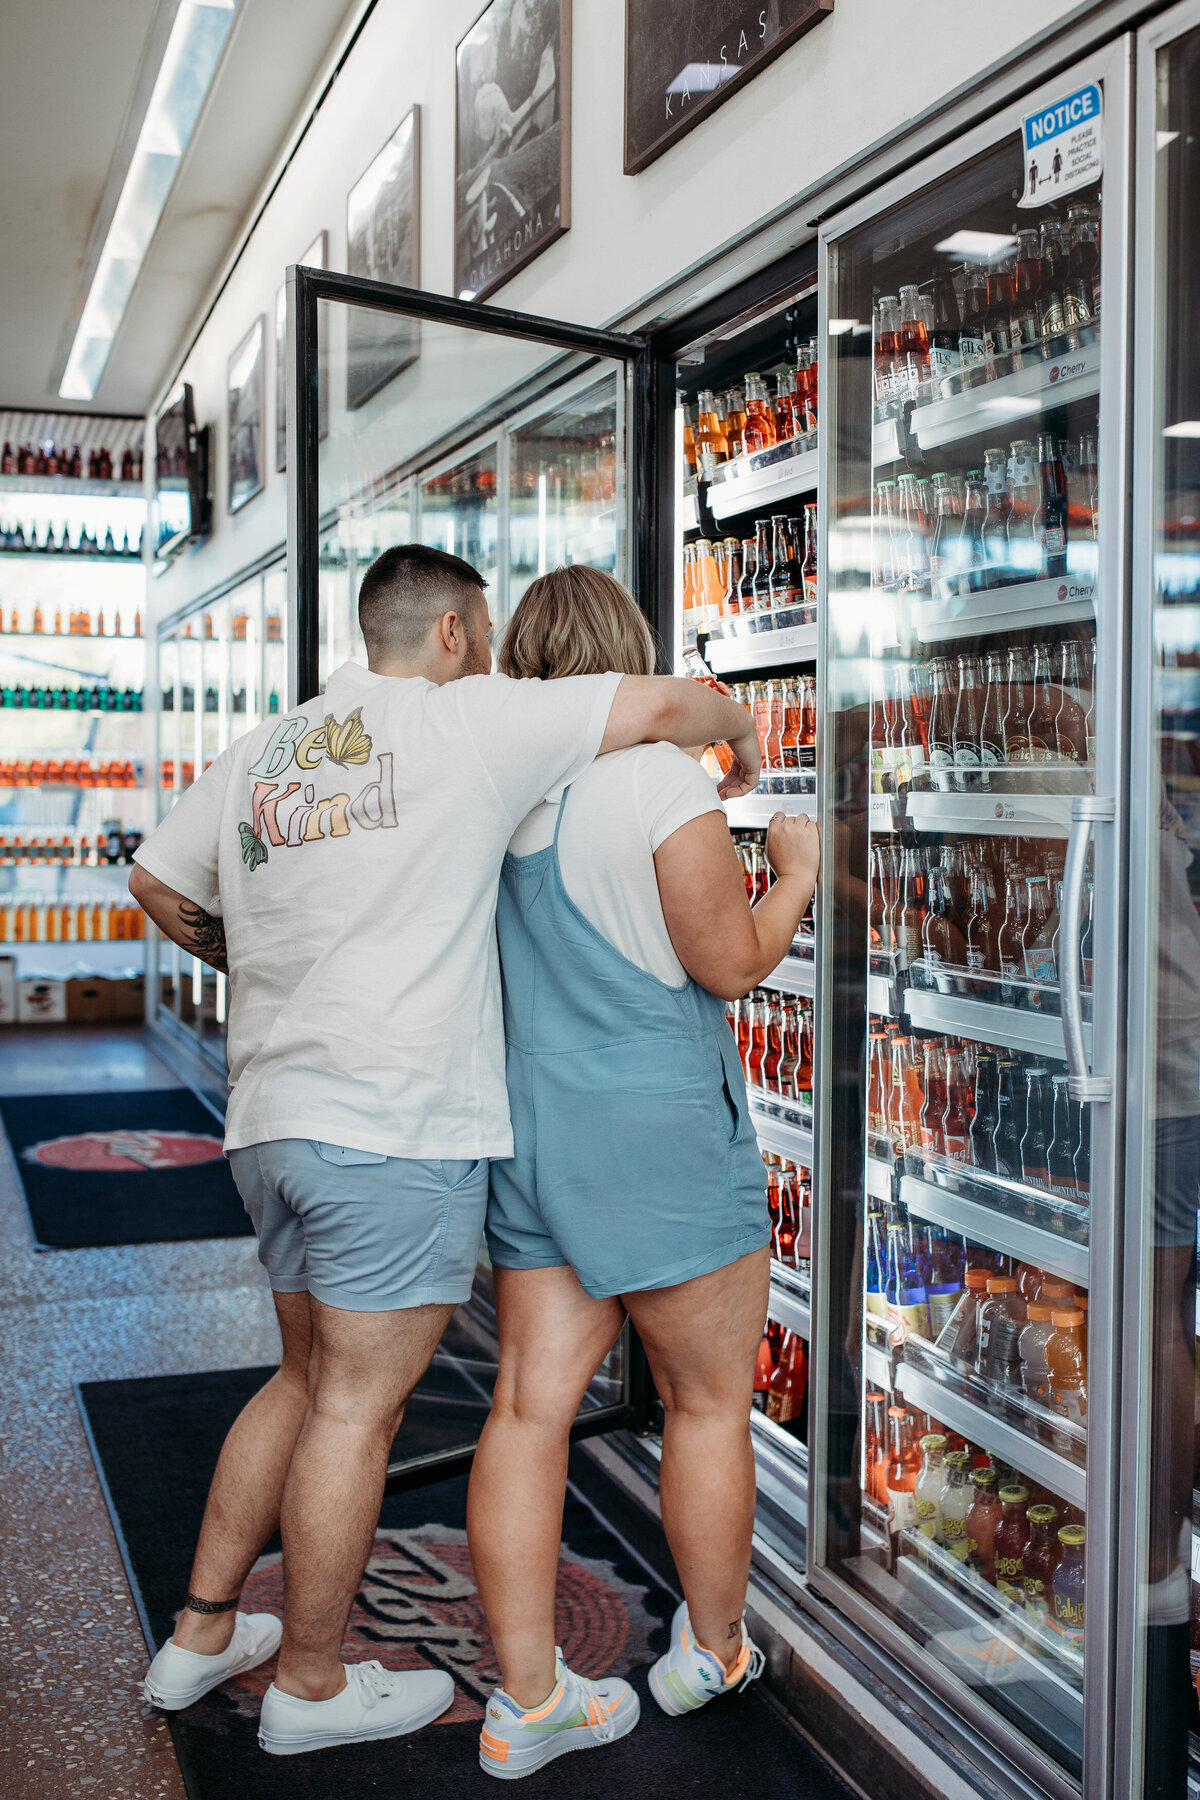 Two individuals playfully choosing drinks from a refrigerator in a convenience store